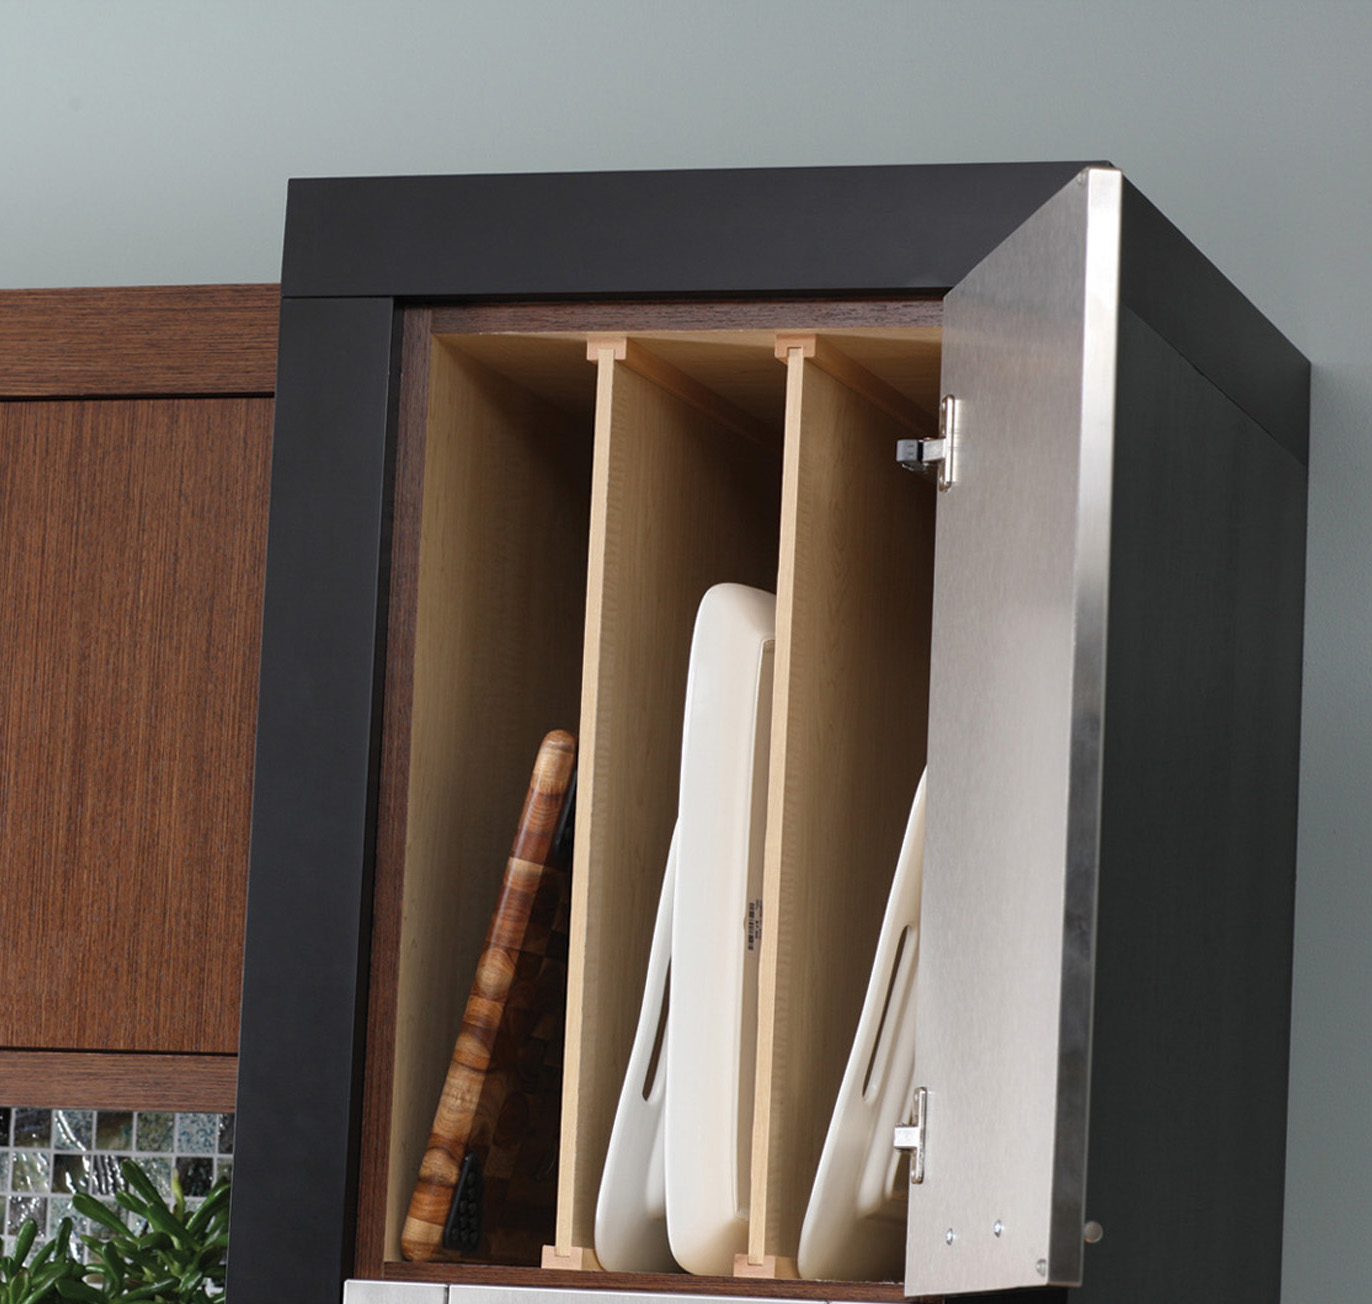 Base Pull-Out Tray Divider Cabinet - Dura Supreme Cabinetry